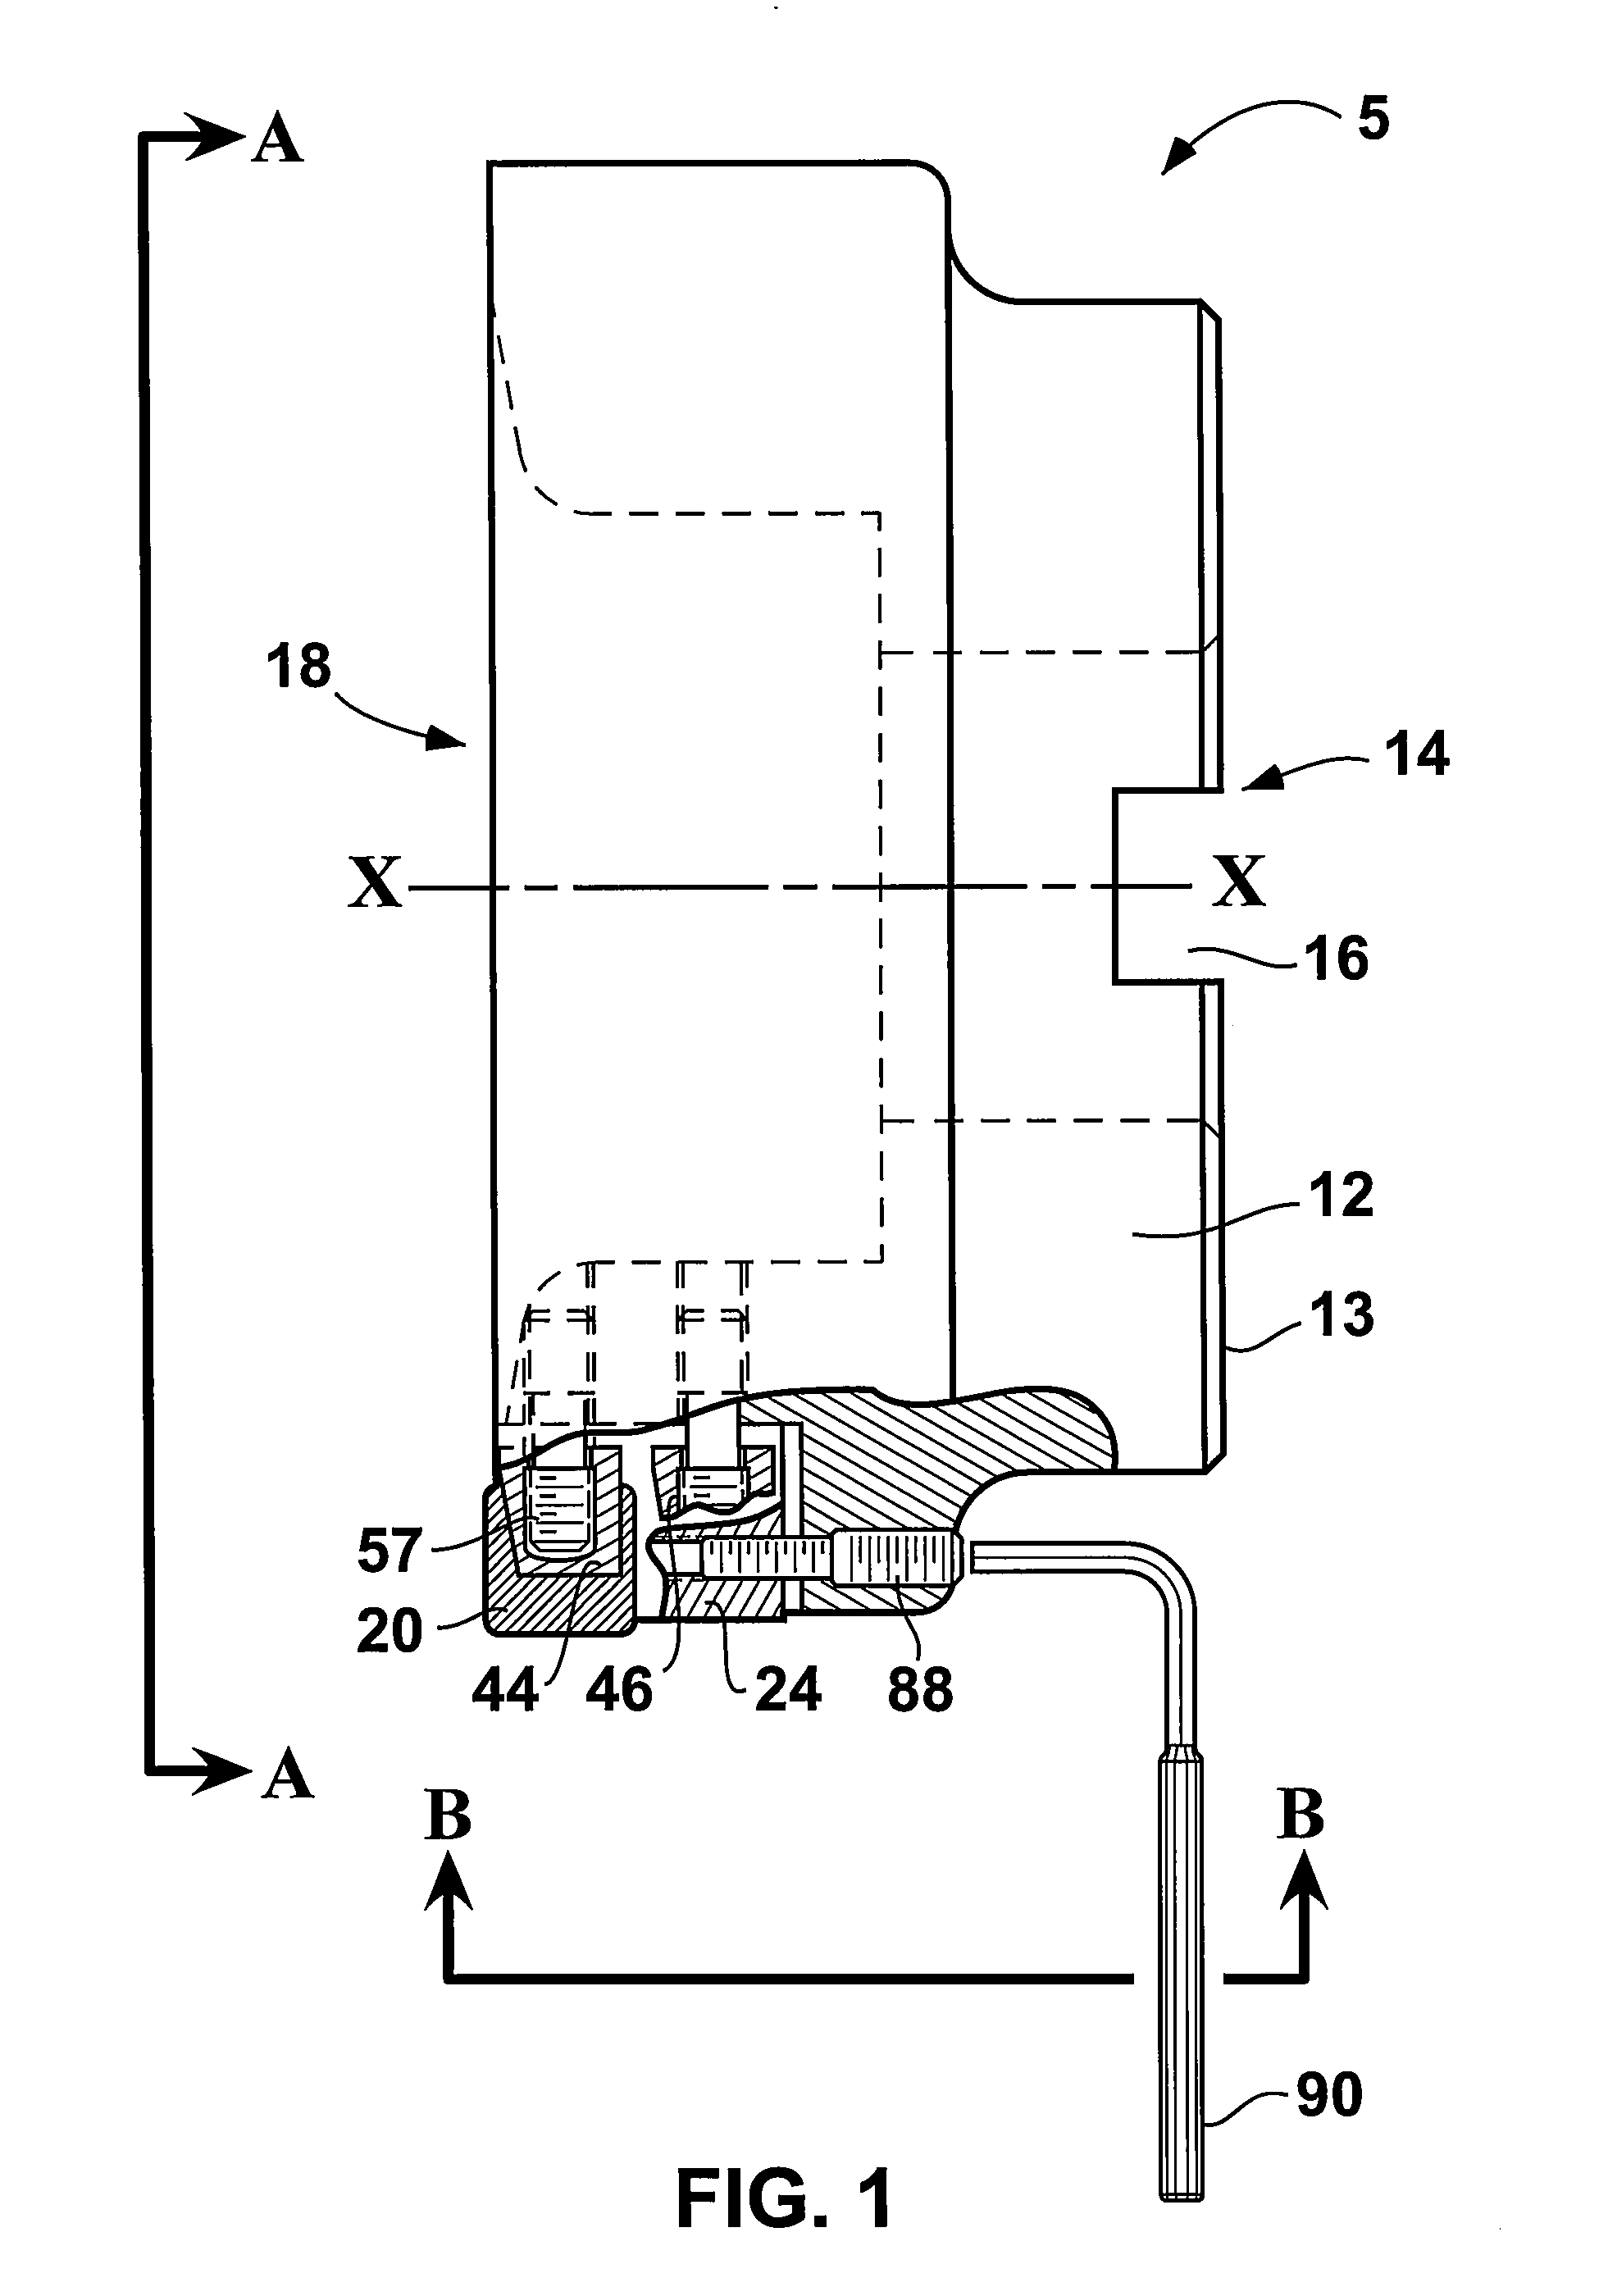 Cutting tool including a cutting insert retaining and adjusting mechanism